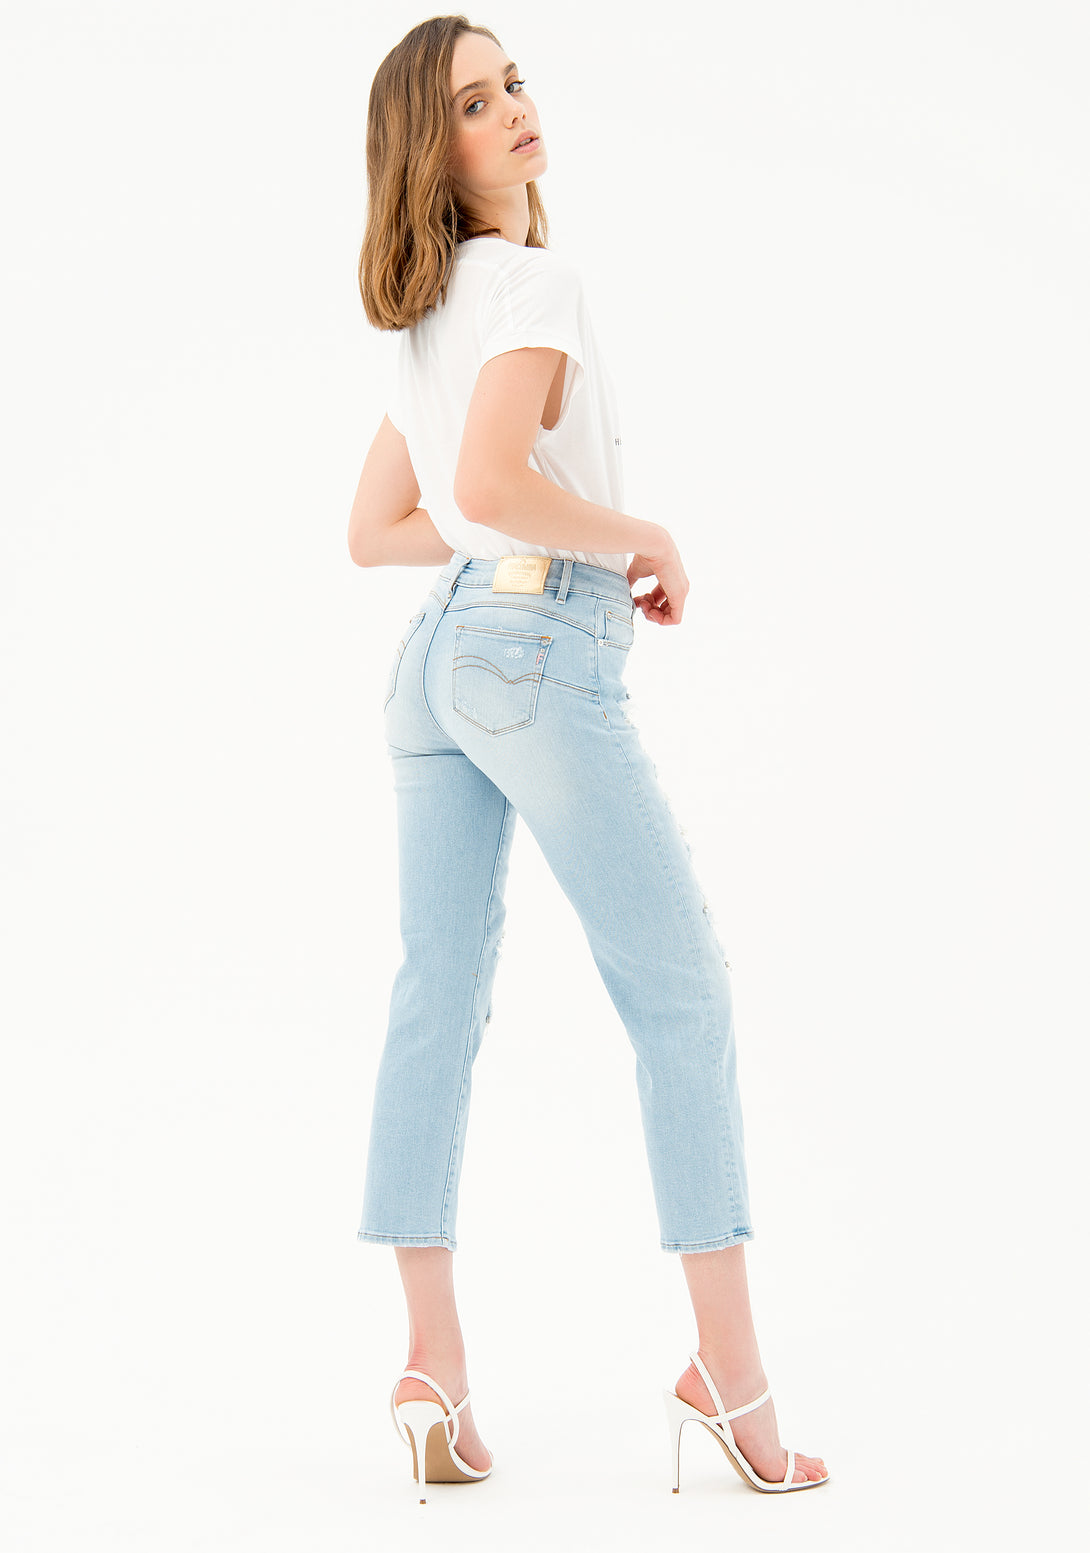 Jeans cropped fit made in denim with light wash and rips